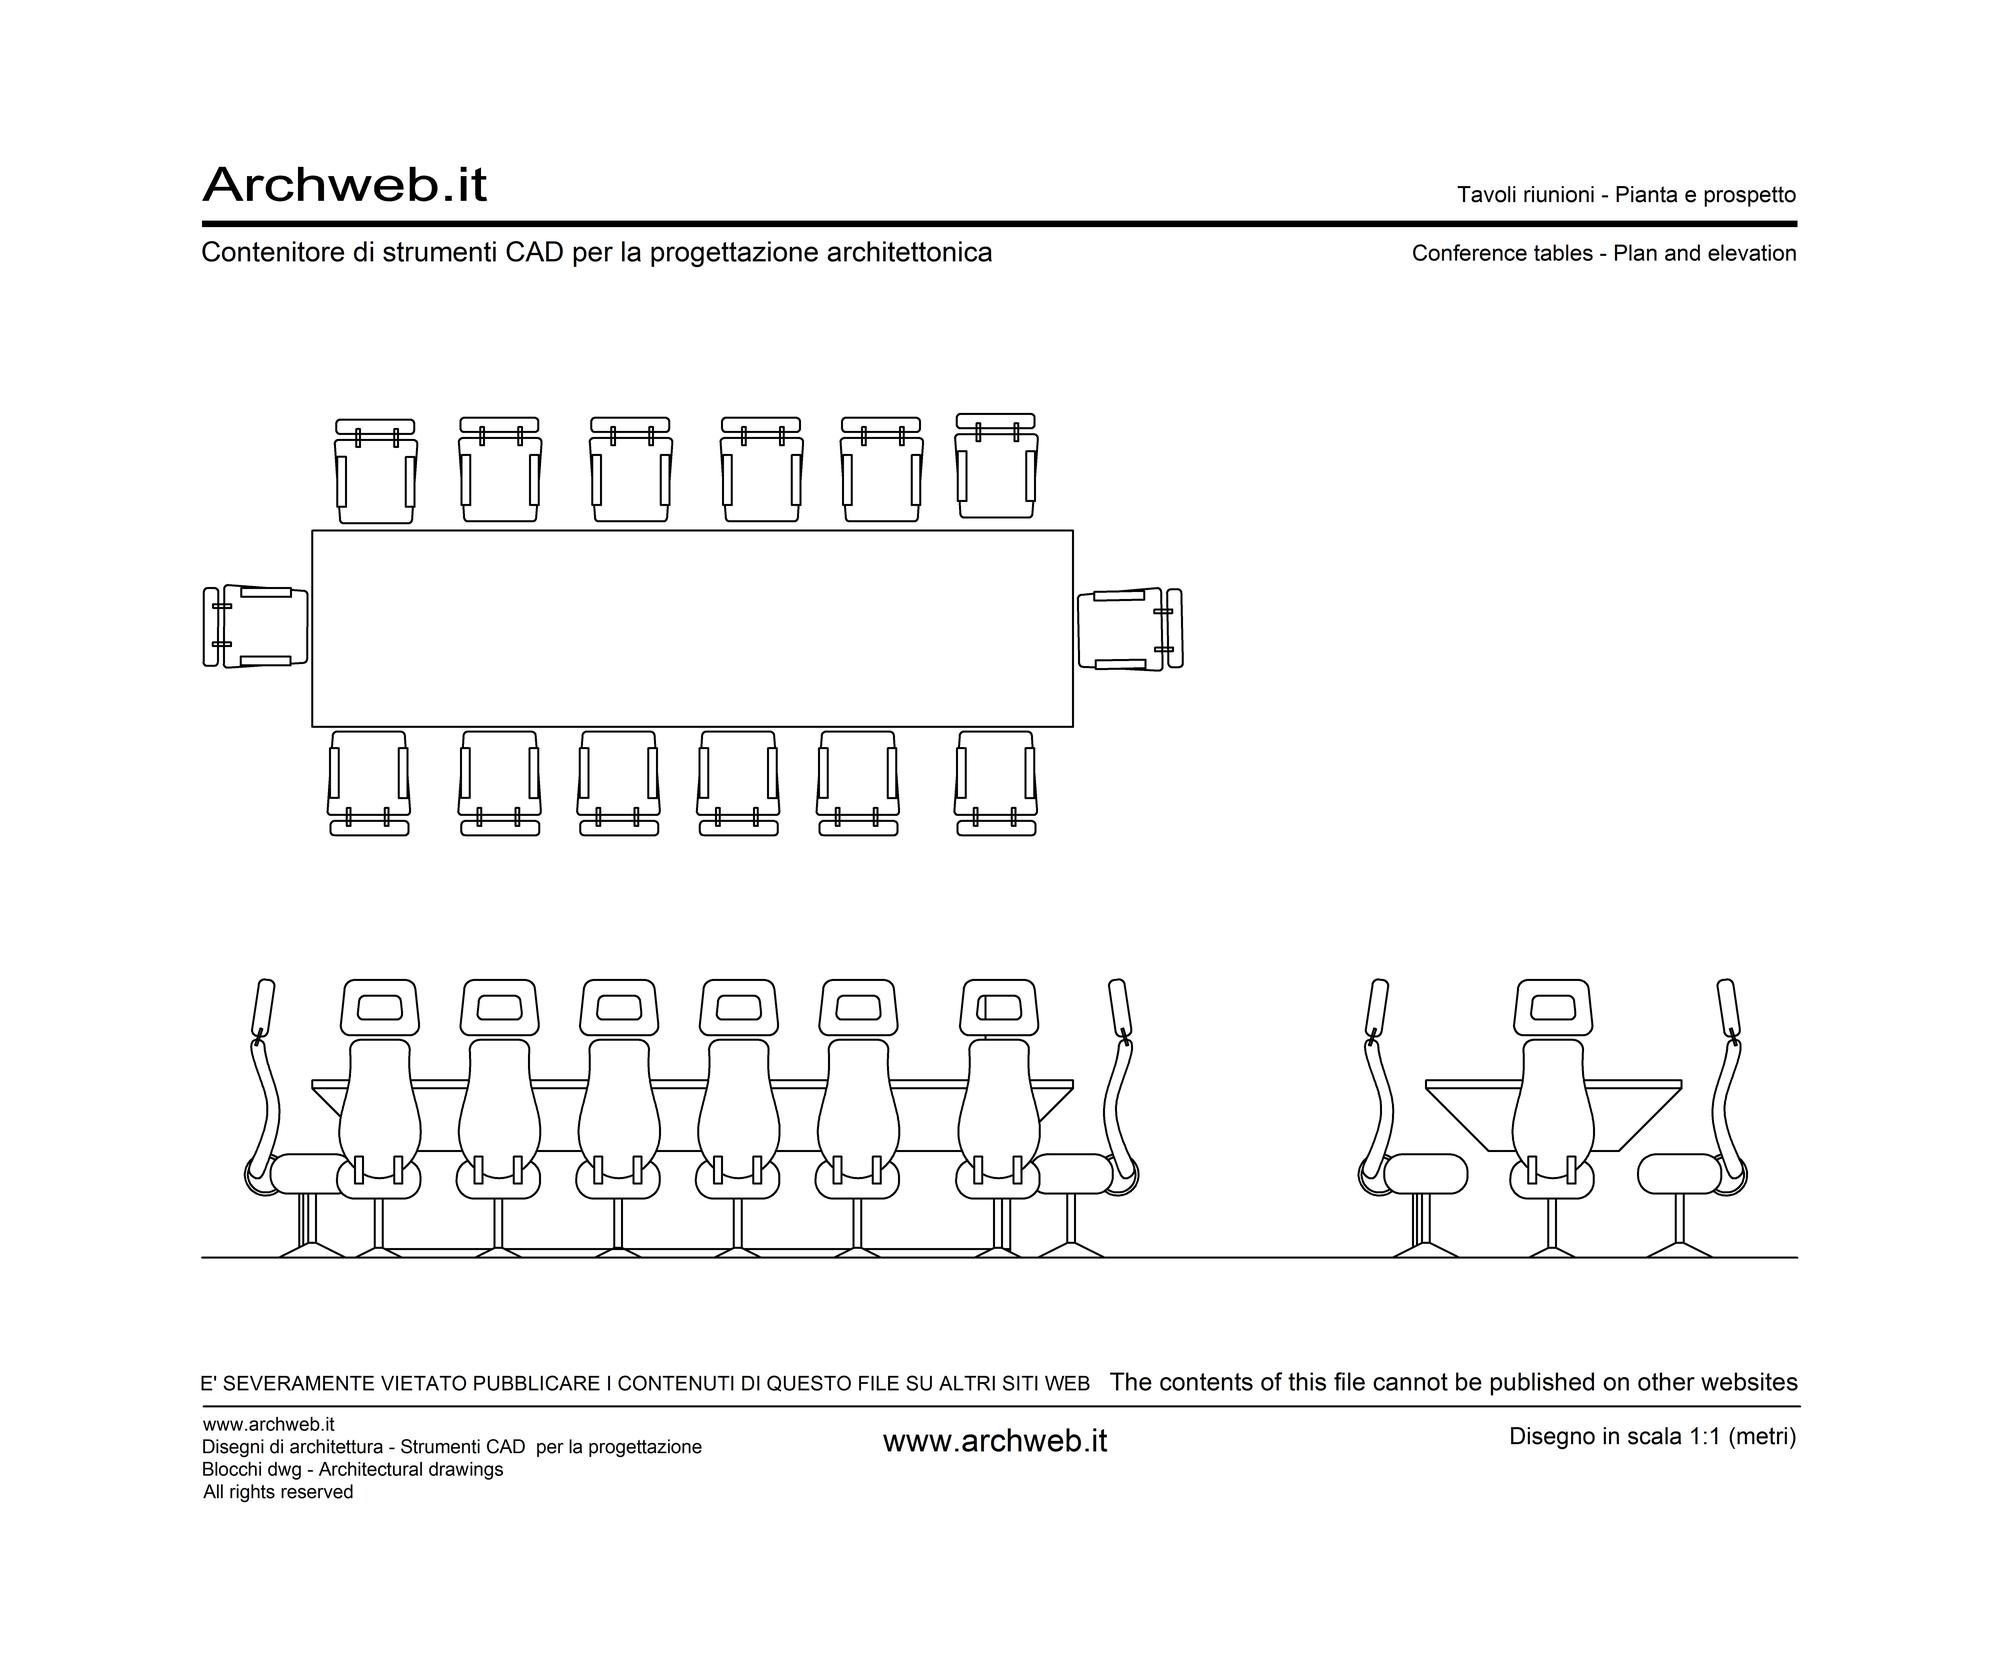 Meeting table 02: plan and elevations dwg Archweb